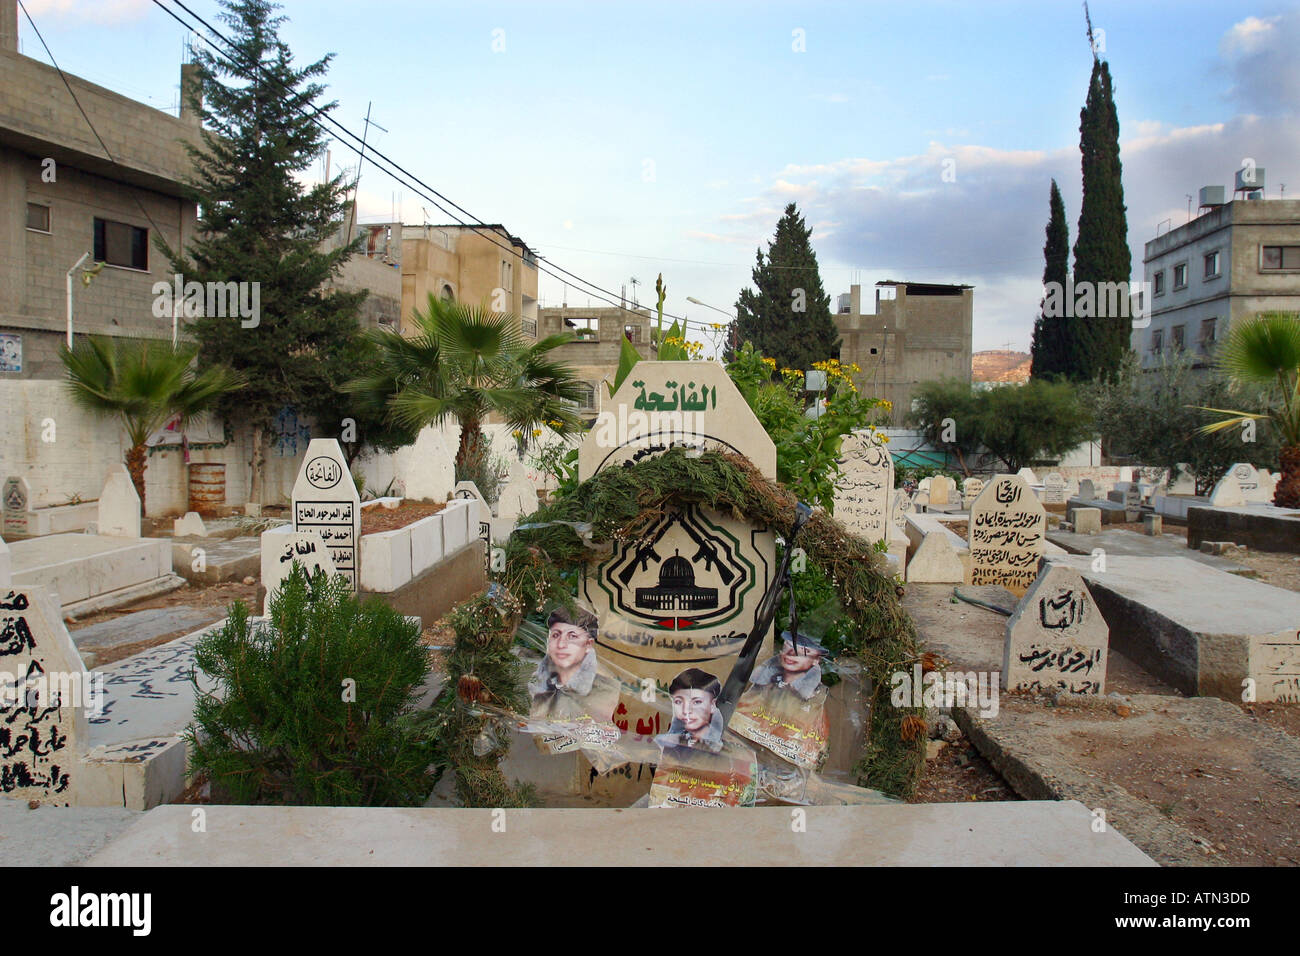 The grave of one of the many Martyrs killed during the 2nd Intifada who is buried in the Balata camp graveyard Stock Photo